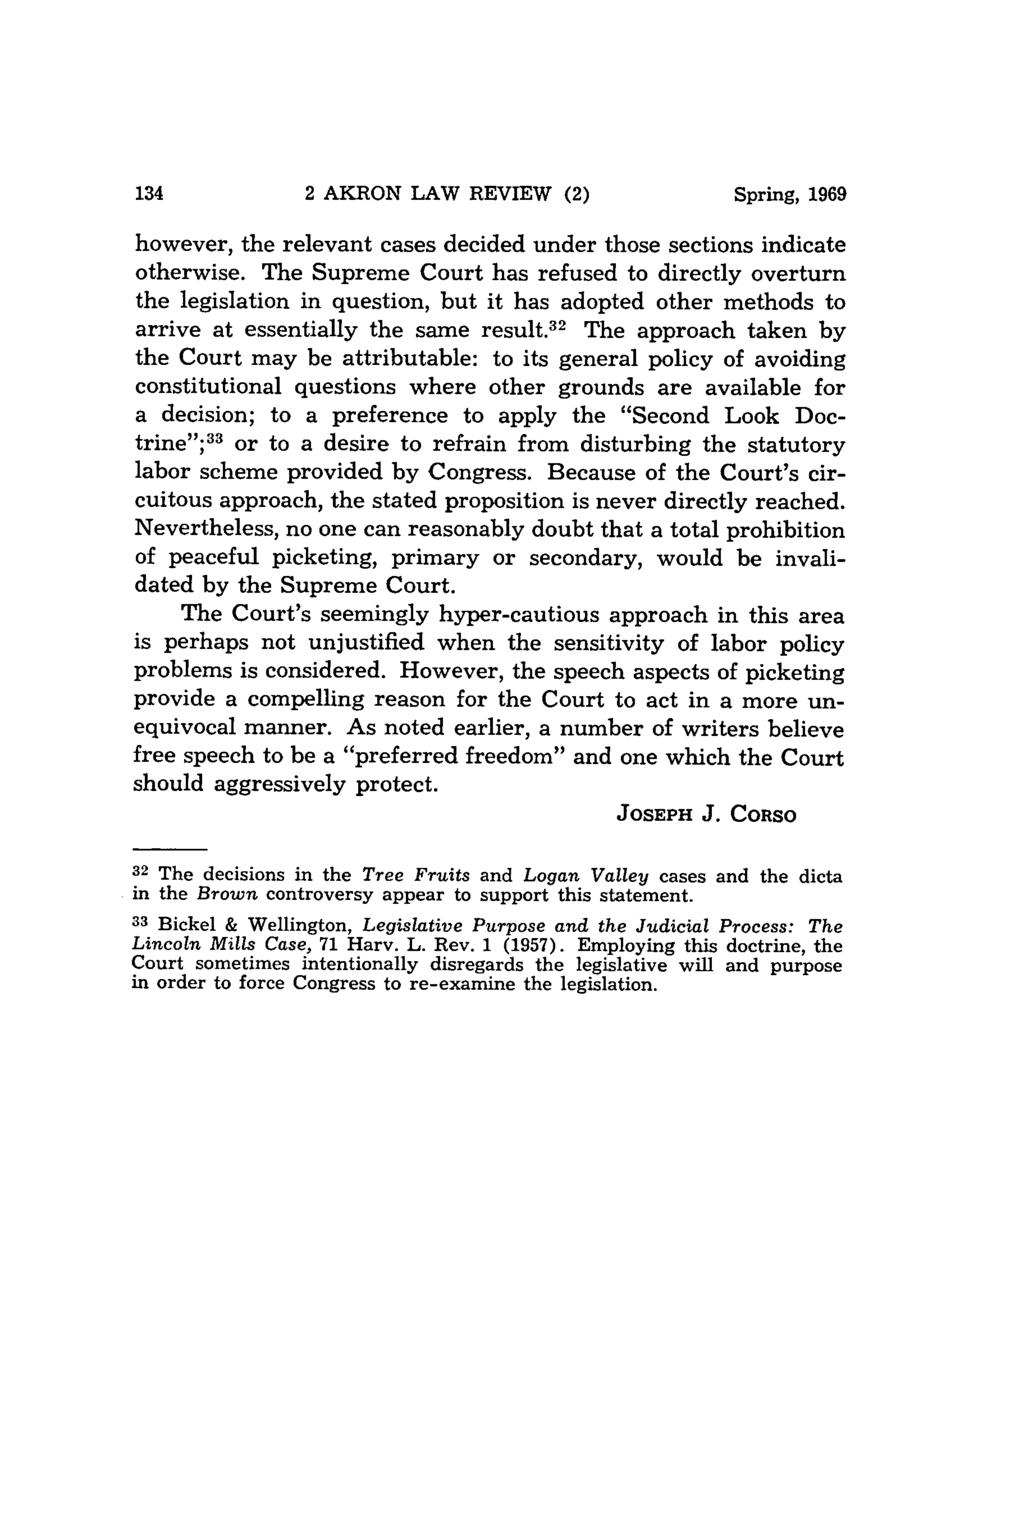 2 AKRON LAW REVIEW (2) Spring, 1969 however, the relevant cases decided under those sections indicate otherwise.